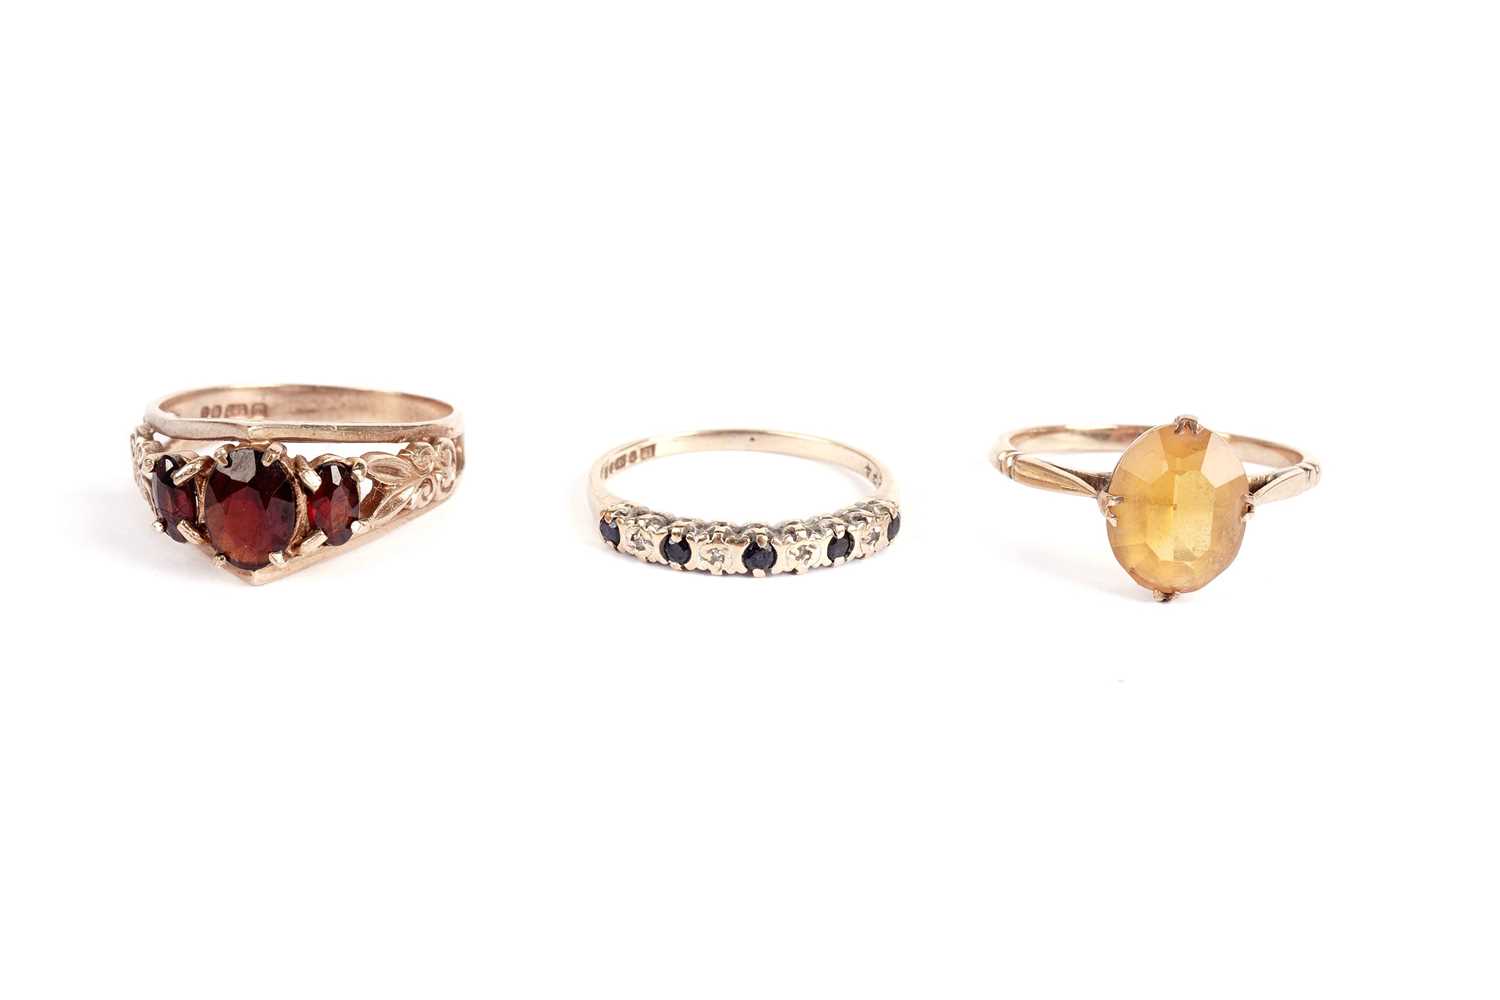 A garnet ring and two other rings